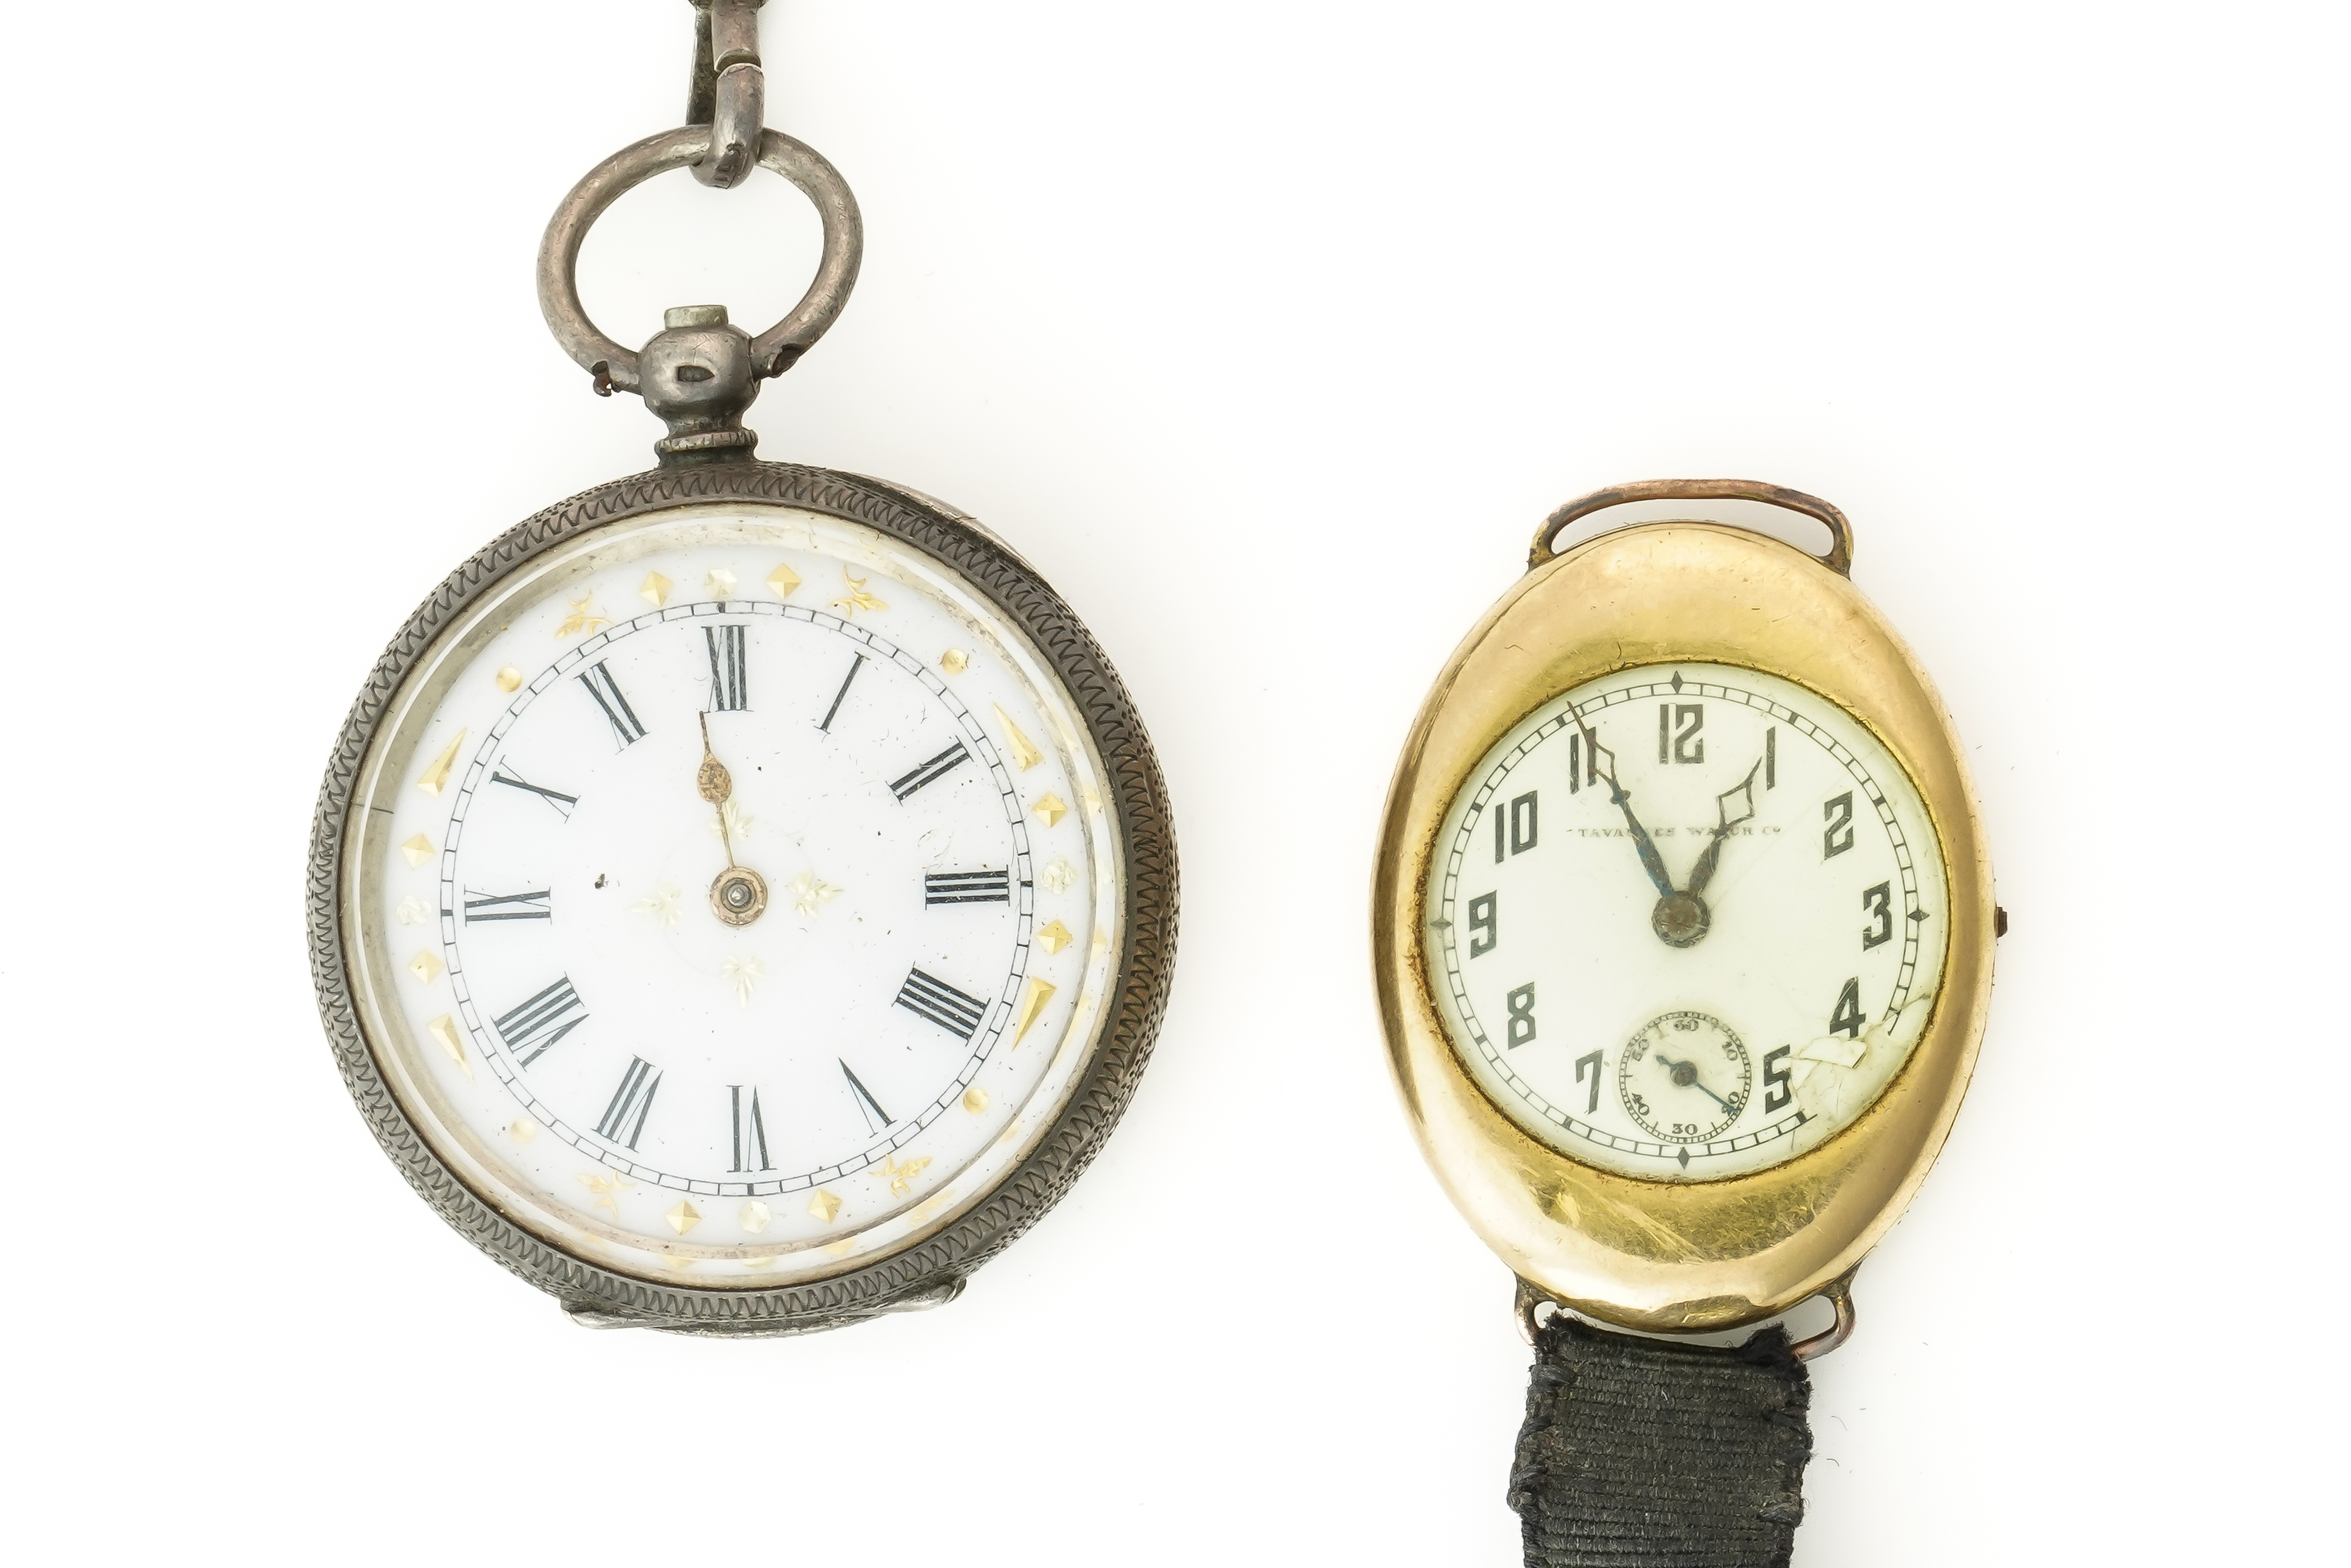 A TAVANNES WATCH CO GOLD OVAL CASED LADY'S WRISTWATCH AND A SILVER FOB WATCH AND CHAIN (3)